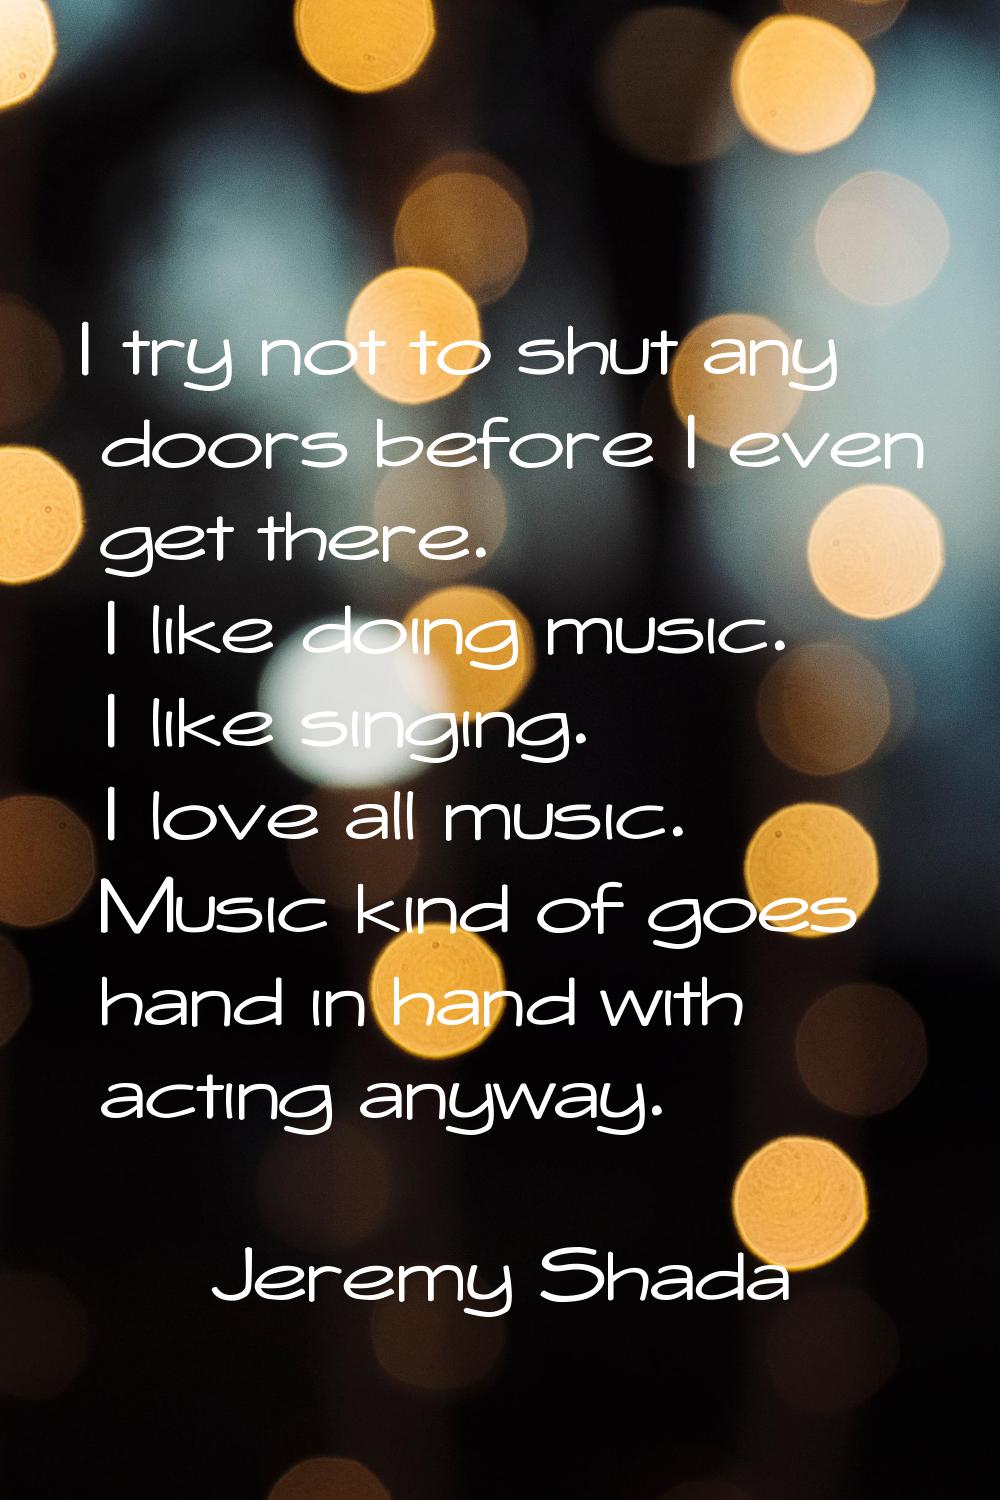 I try not to shut any doors before I even get there. I like doing music. I like singing. I love all